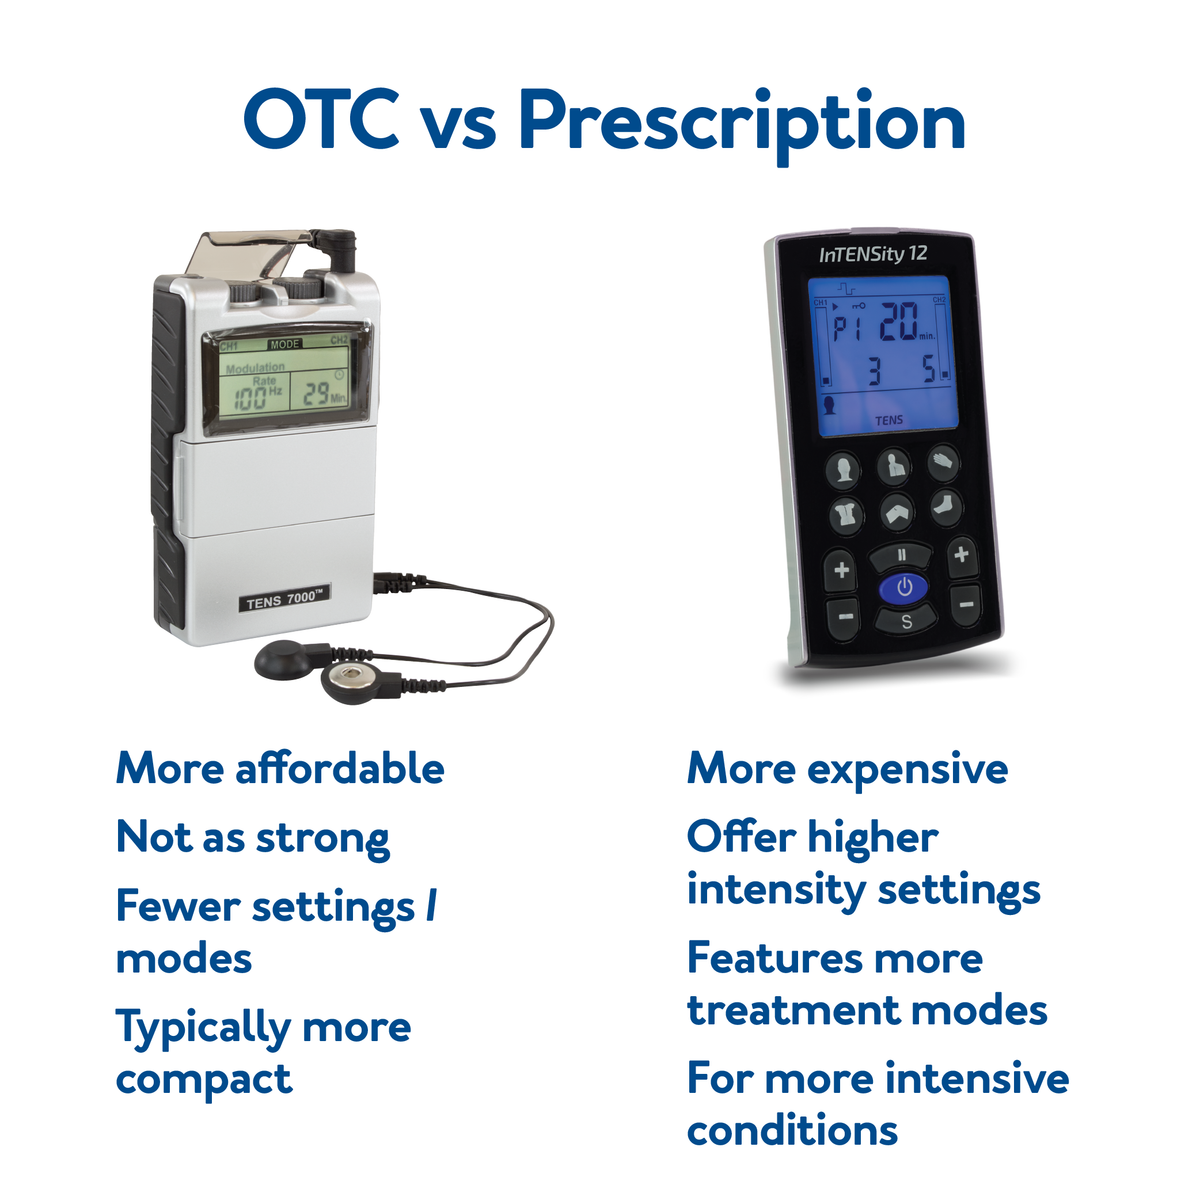 OTC vs Prescription TENS Units with text : Further details are provided below